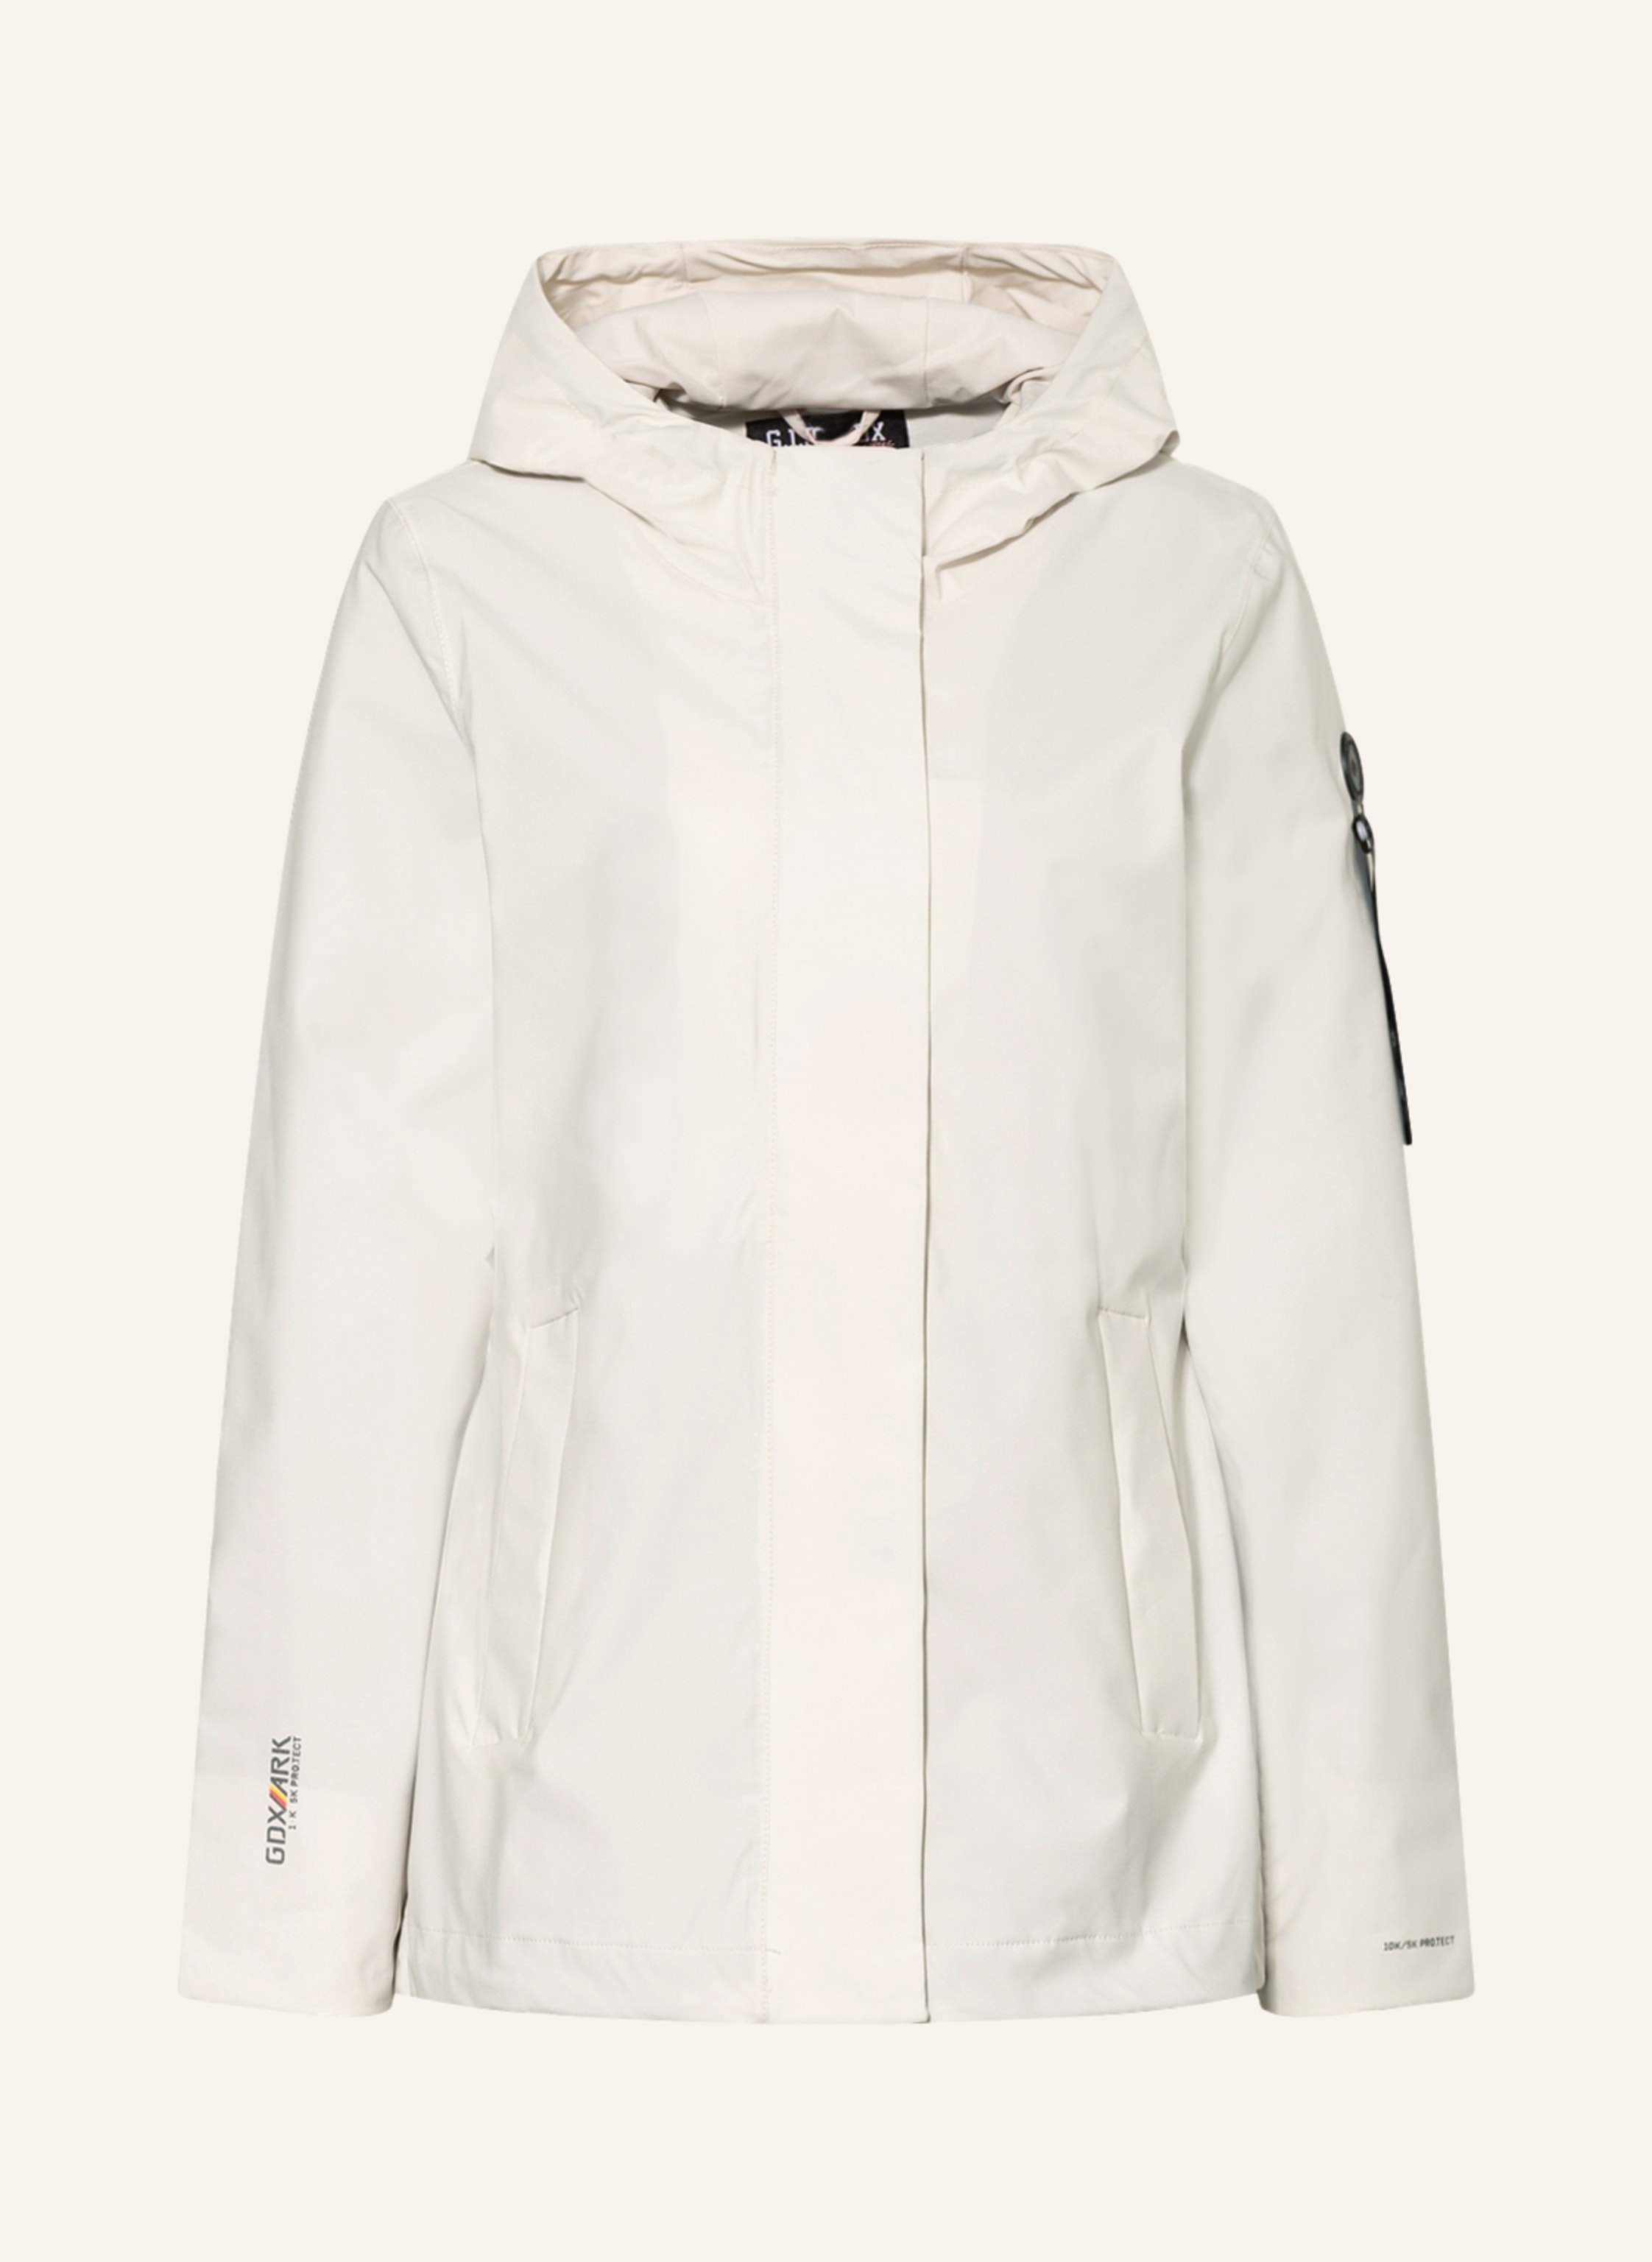 cream killtec jacket DX in by Outdoor 152 G.I.G.A. GS